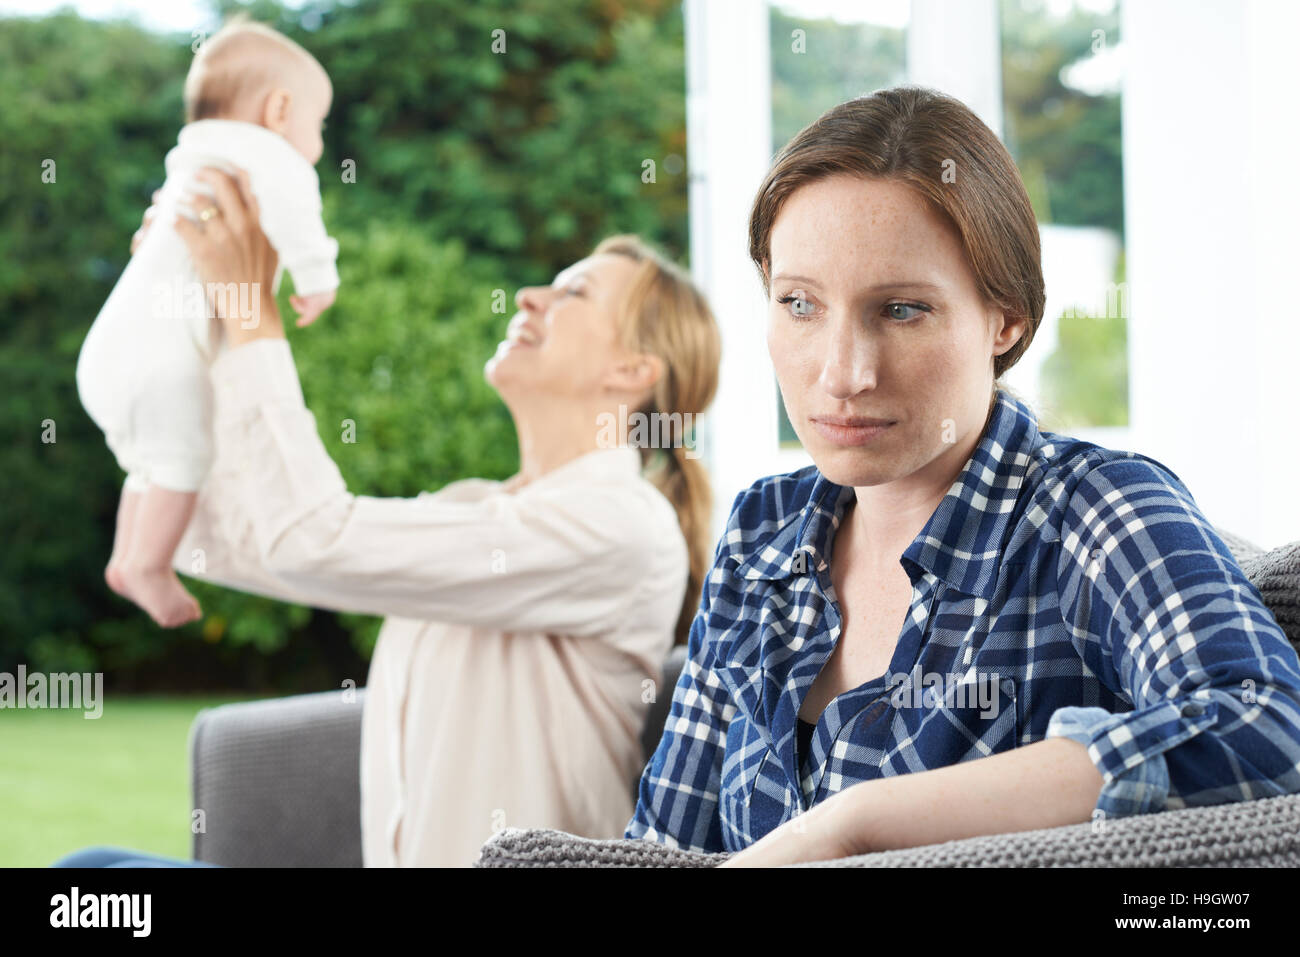 Sad Woman Jealous Of Friend With Young Baby Stock Photo